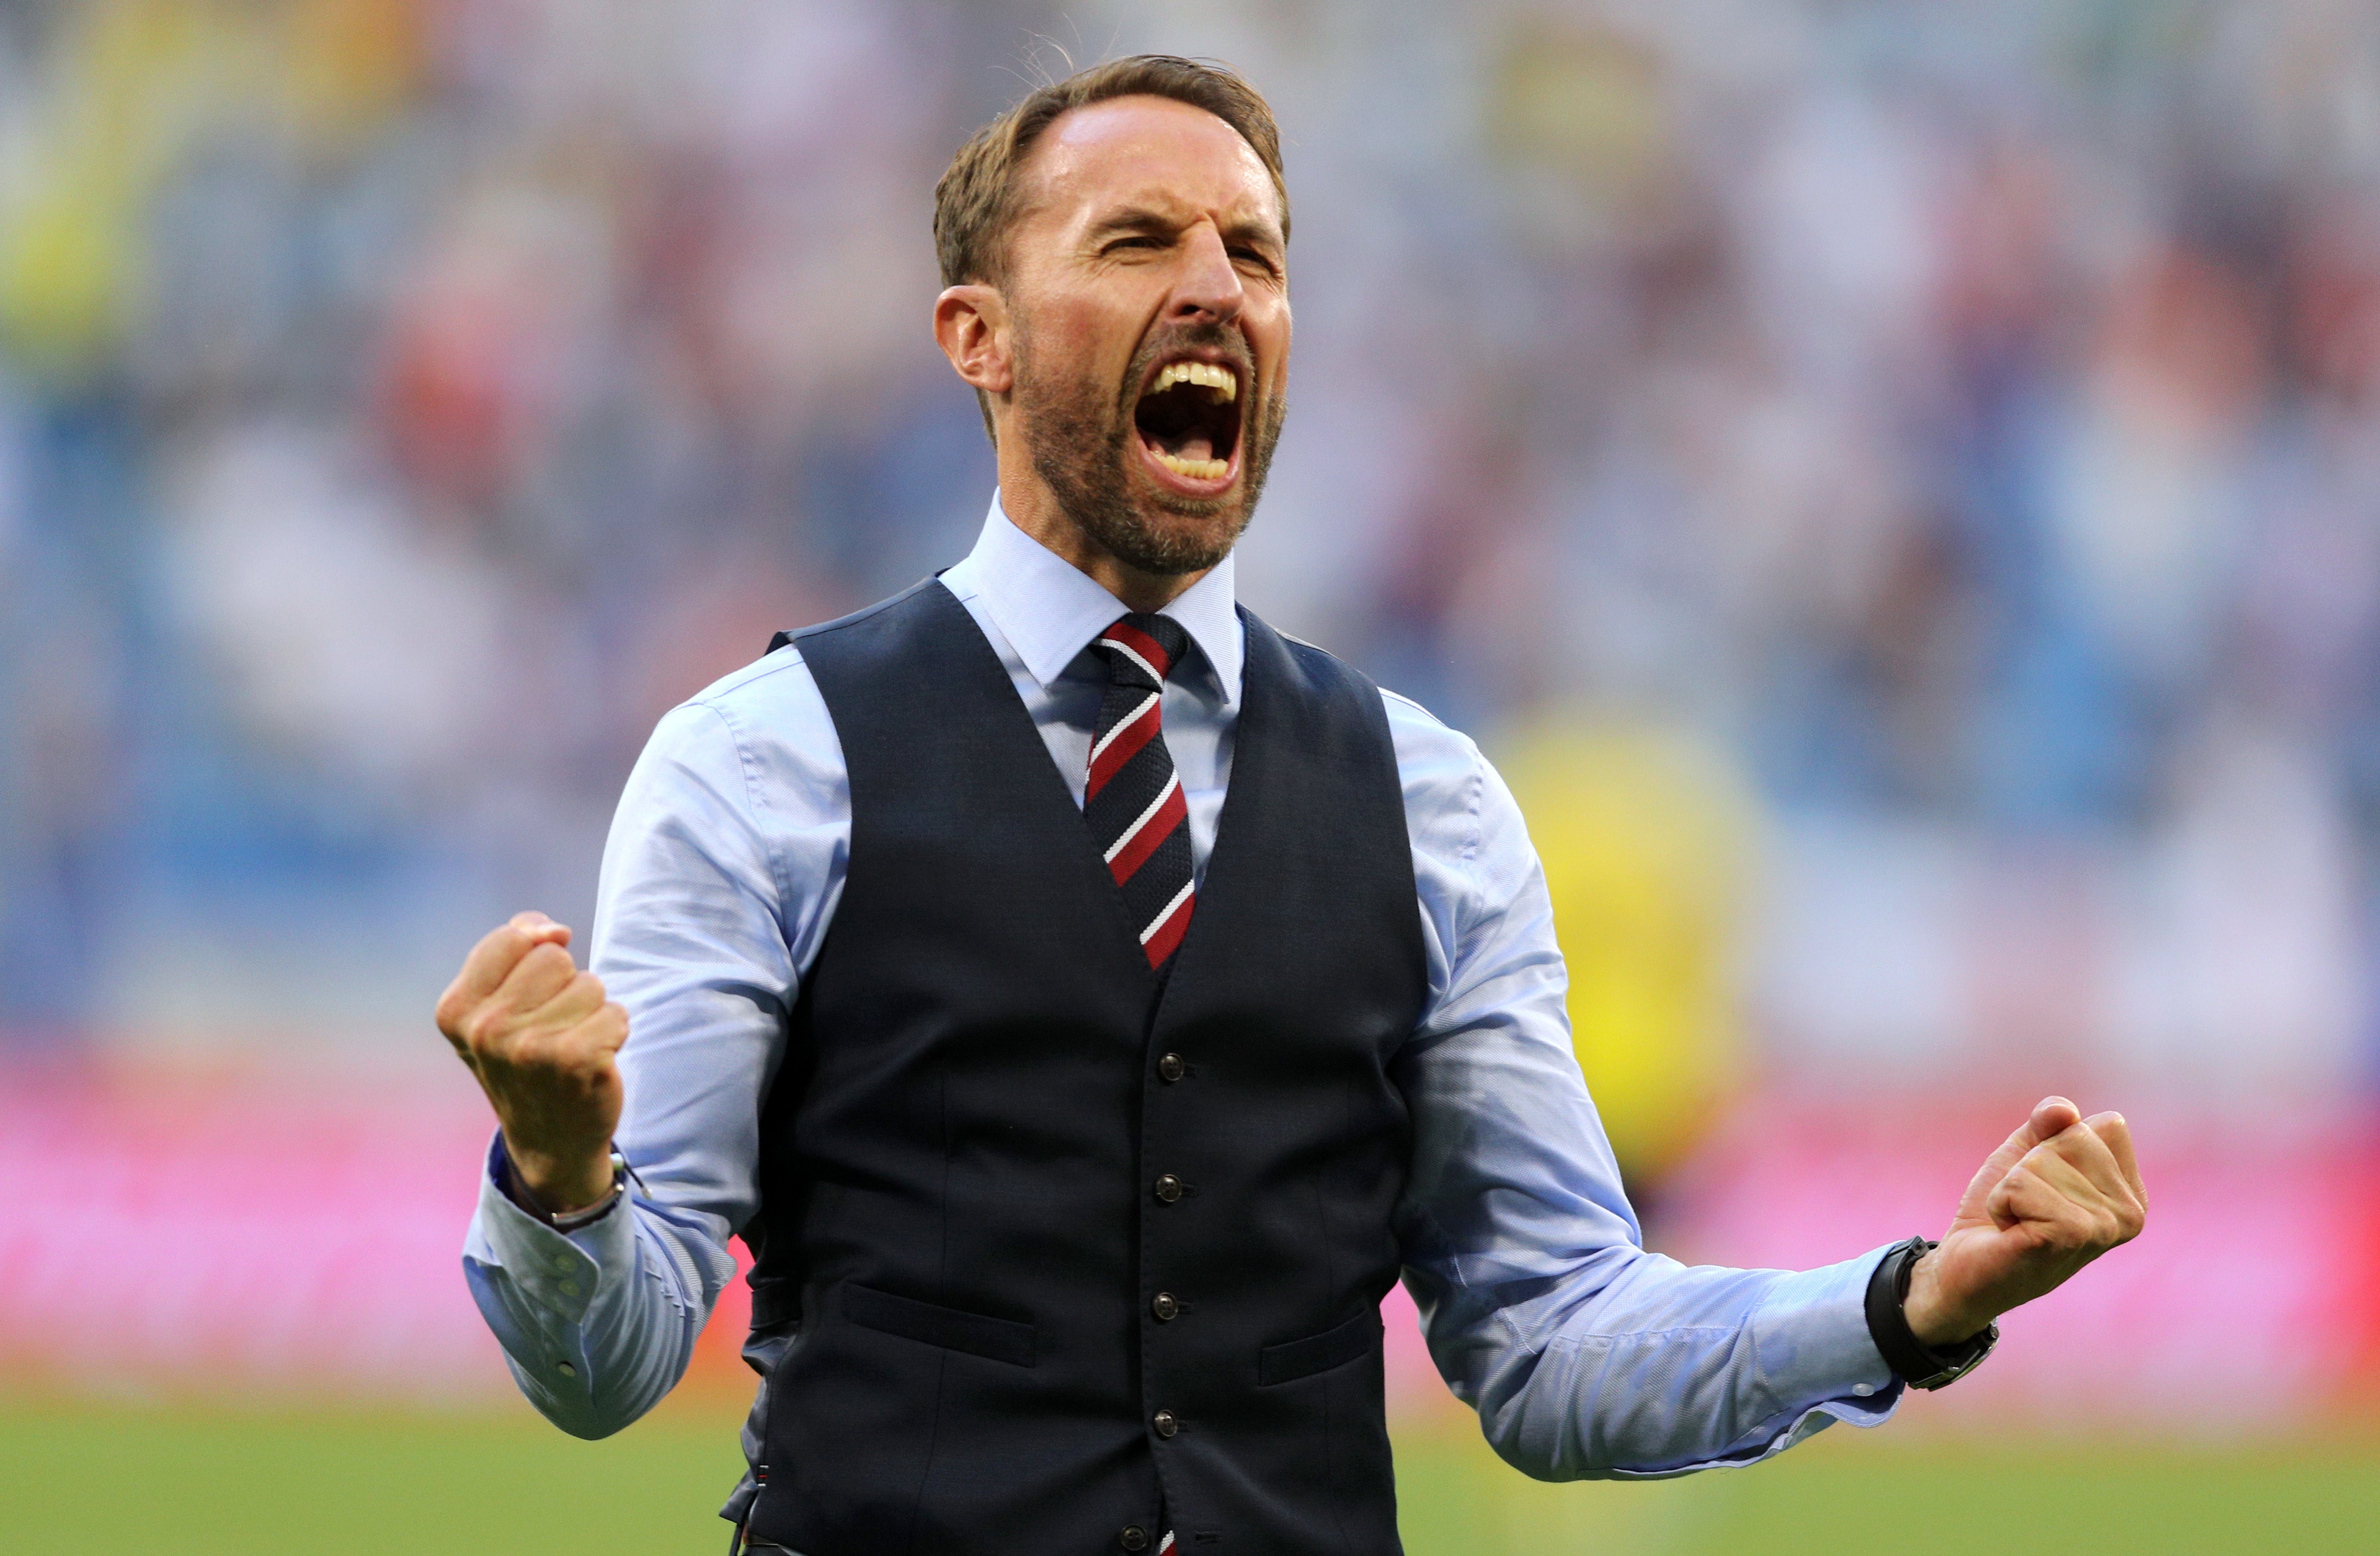 England manager Gareth Southgate celebrates foolowing the World Cup Quarter Final win over Sweden. (Owen Humphreys/PA)